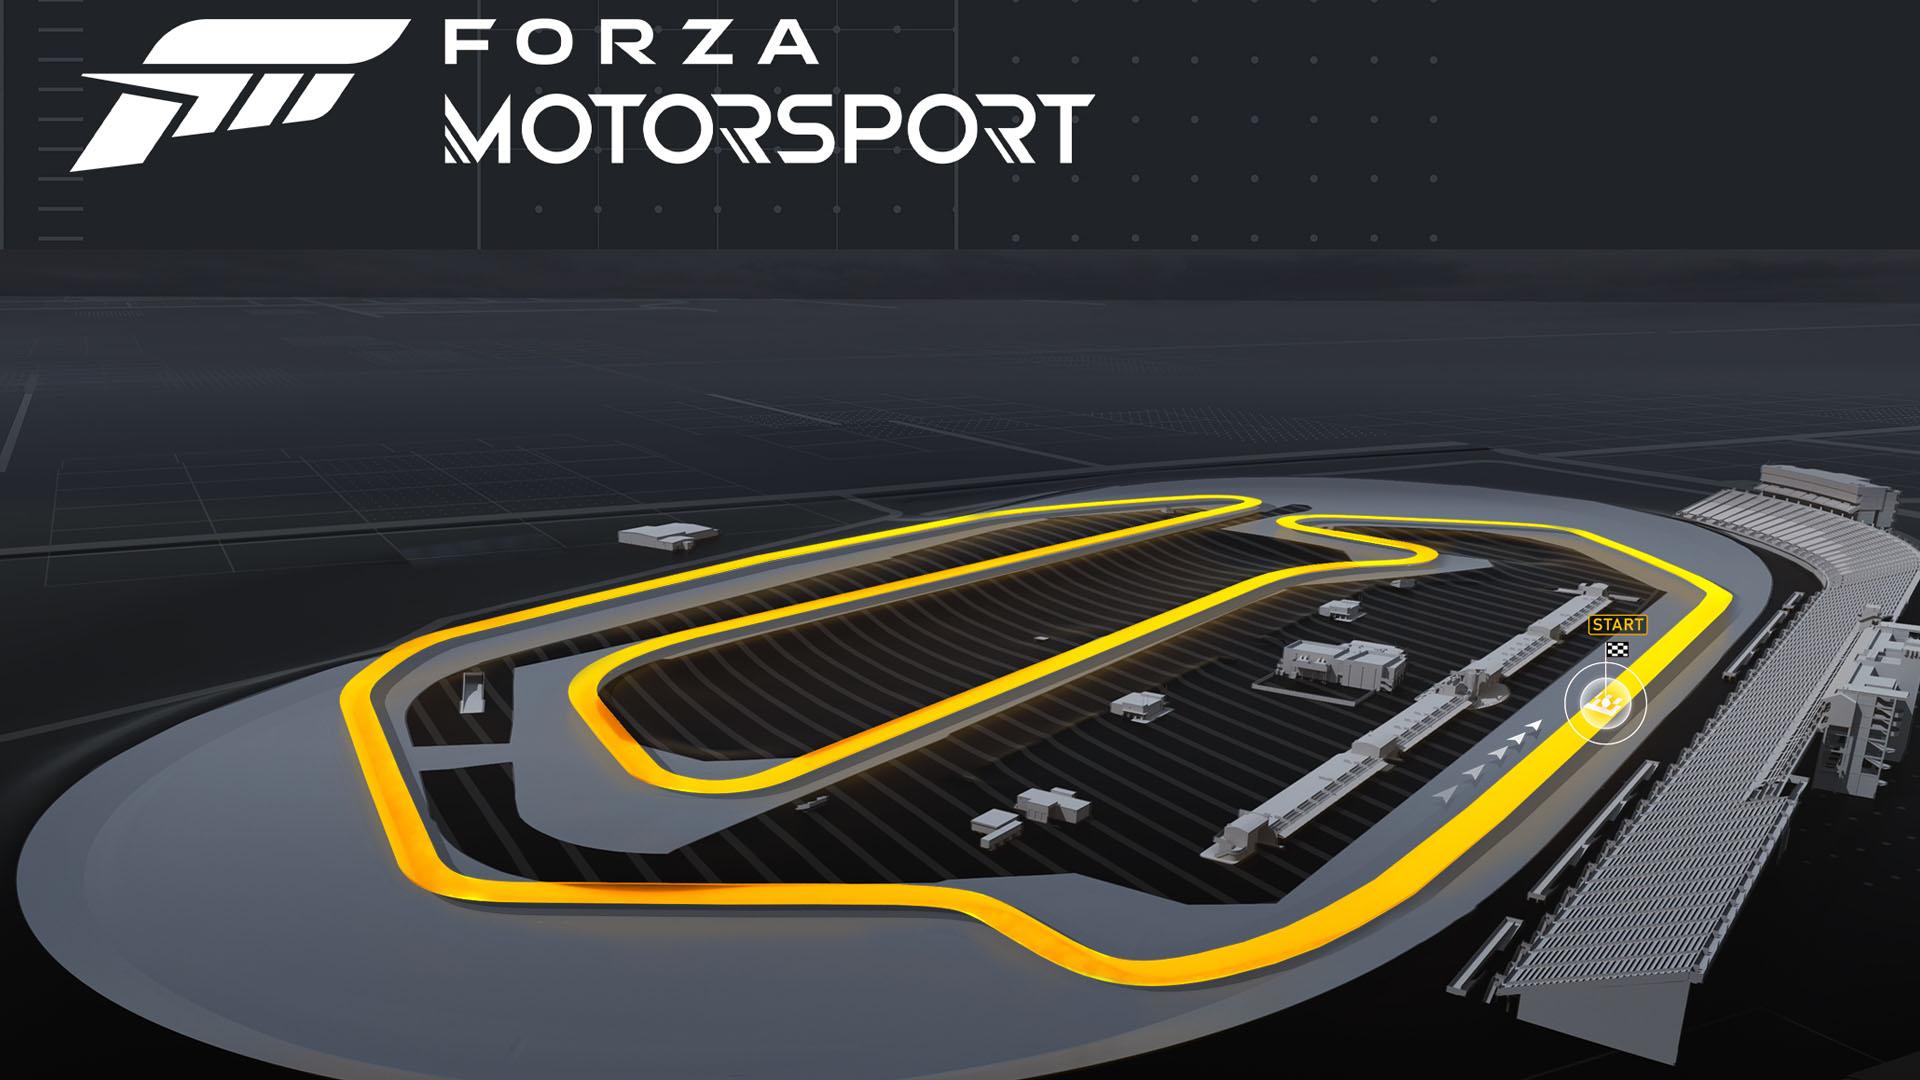 Fresh Additions to the Forza Motorsport 6 Garage with the